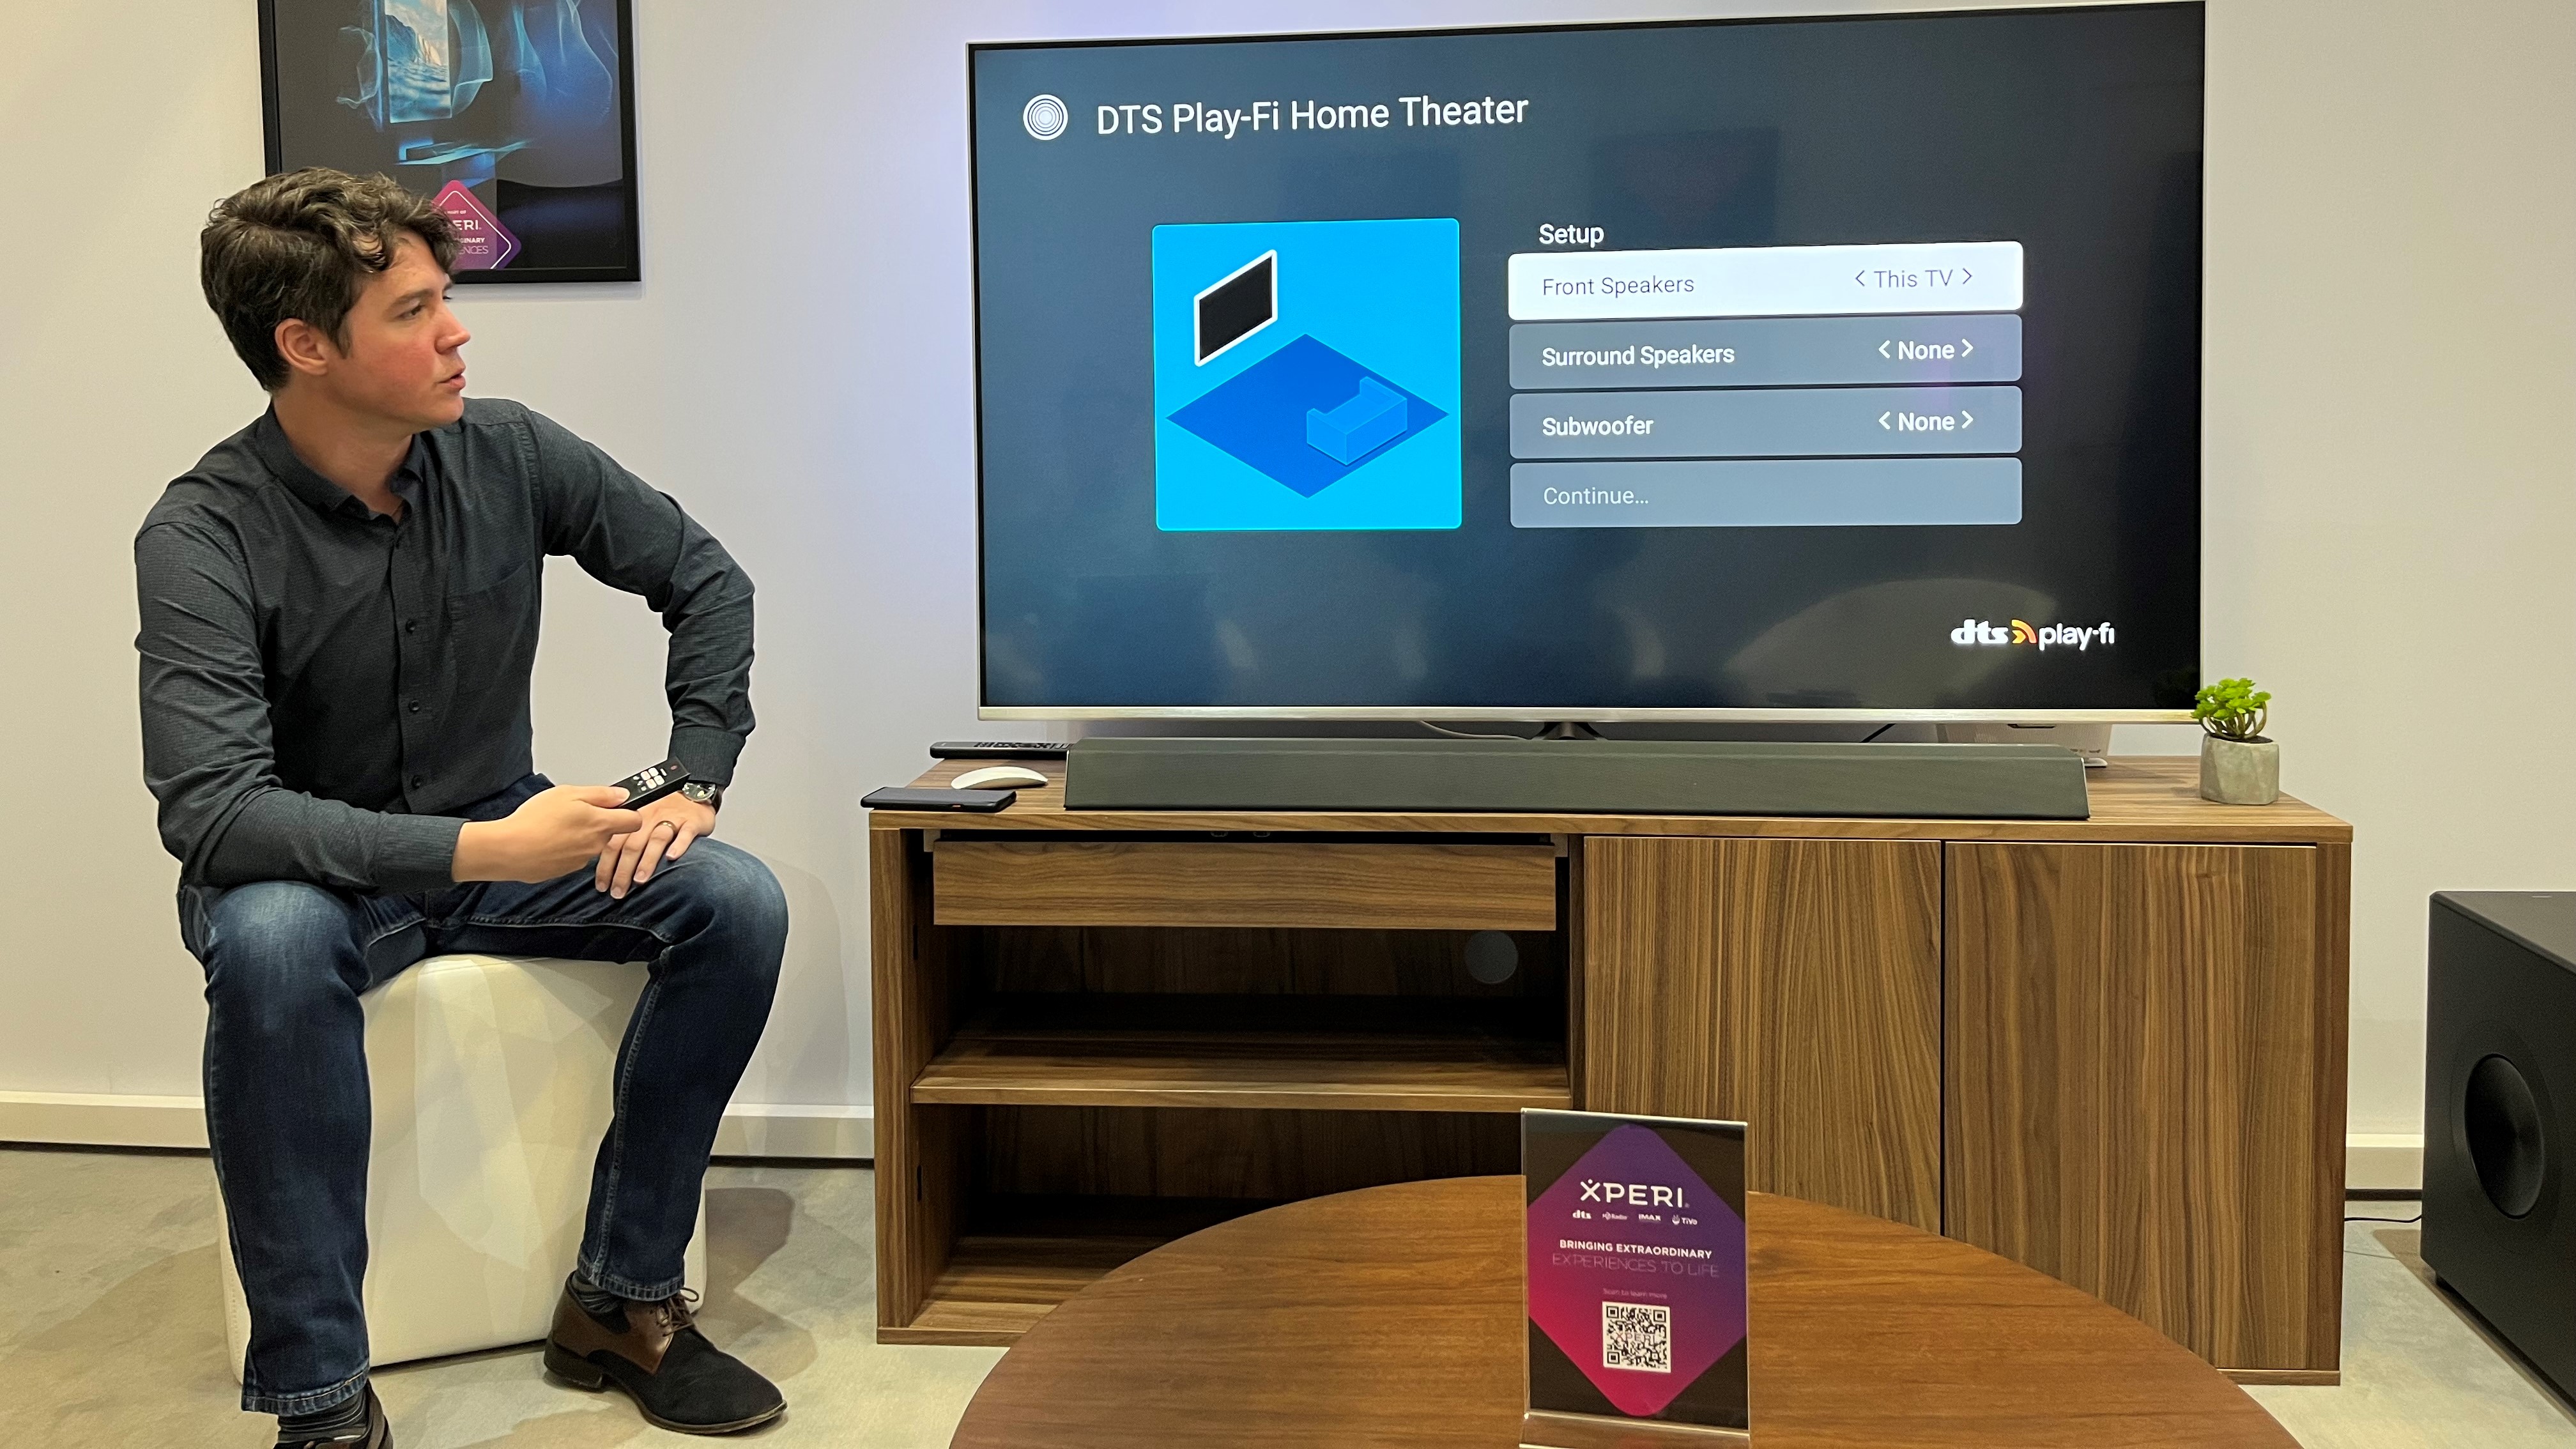 DTS Play-Fi demonstration on TV with product manager nearby